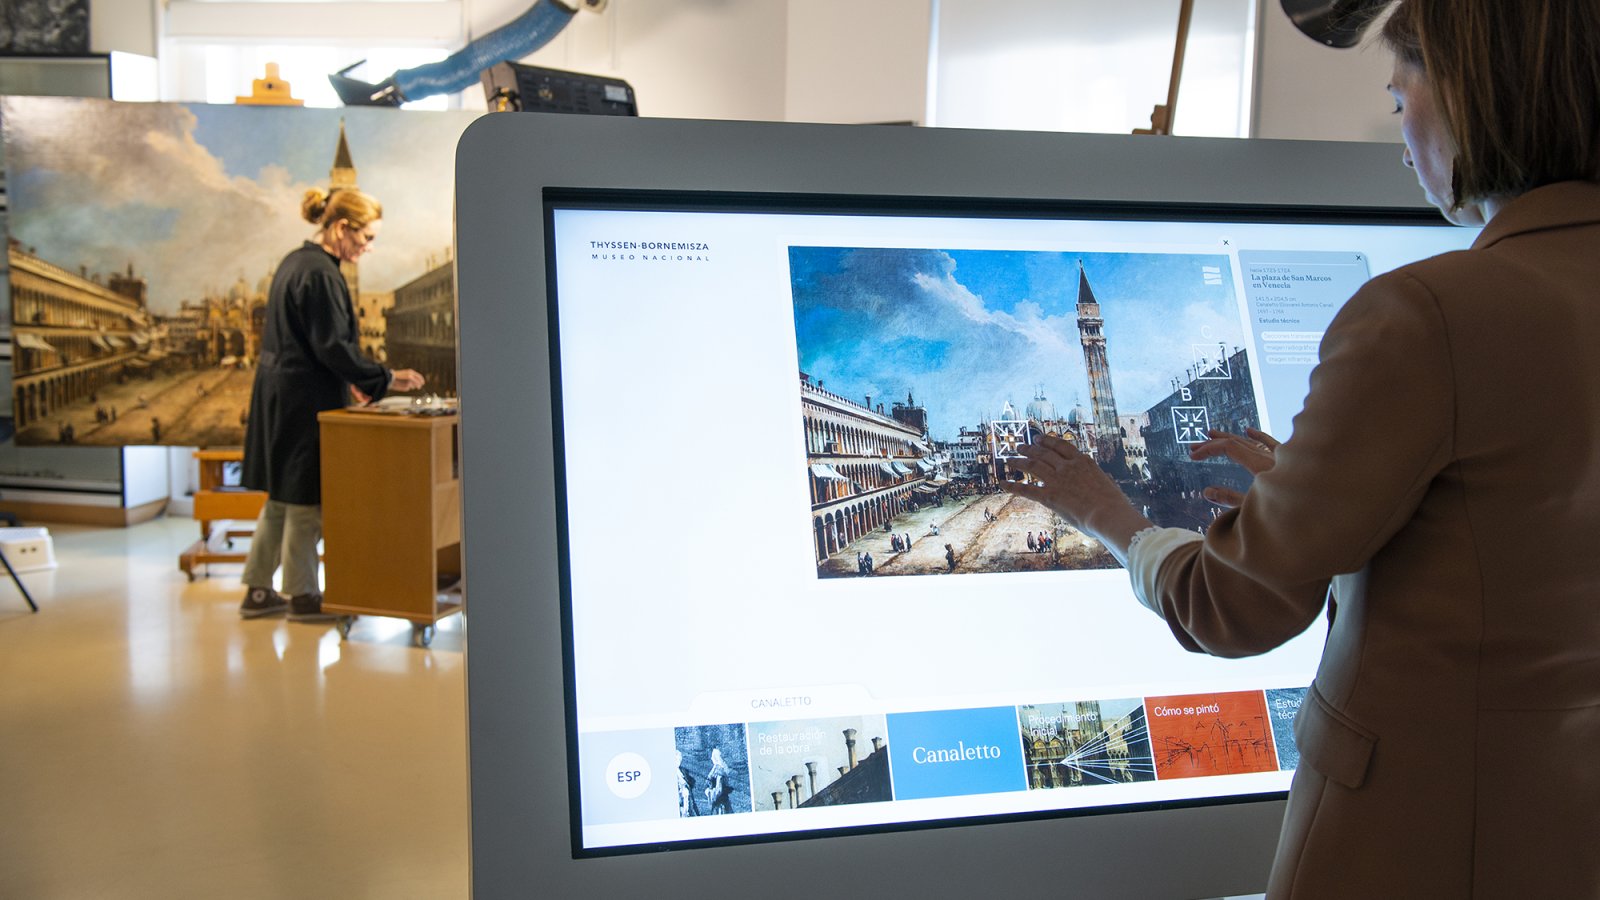 Detail of the interactive project of “The Piazza San Marco in Venice”, by Canaletto